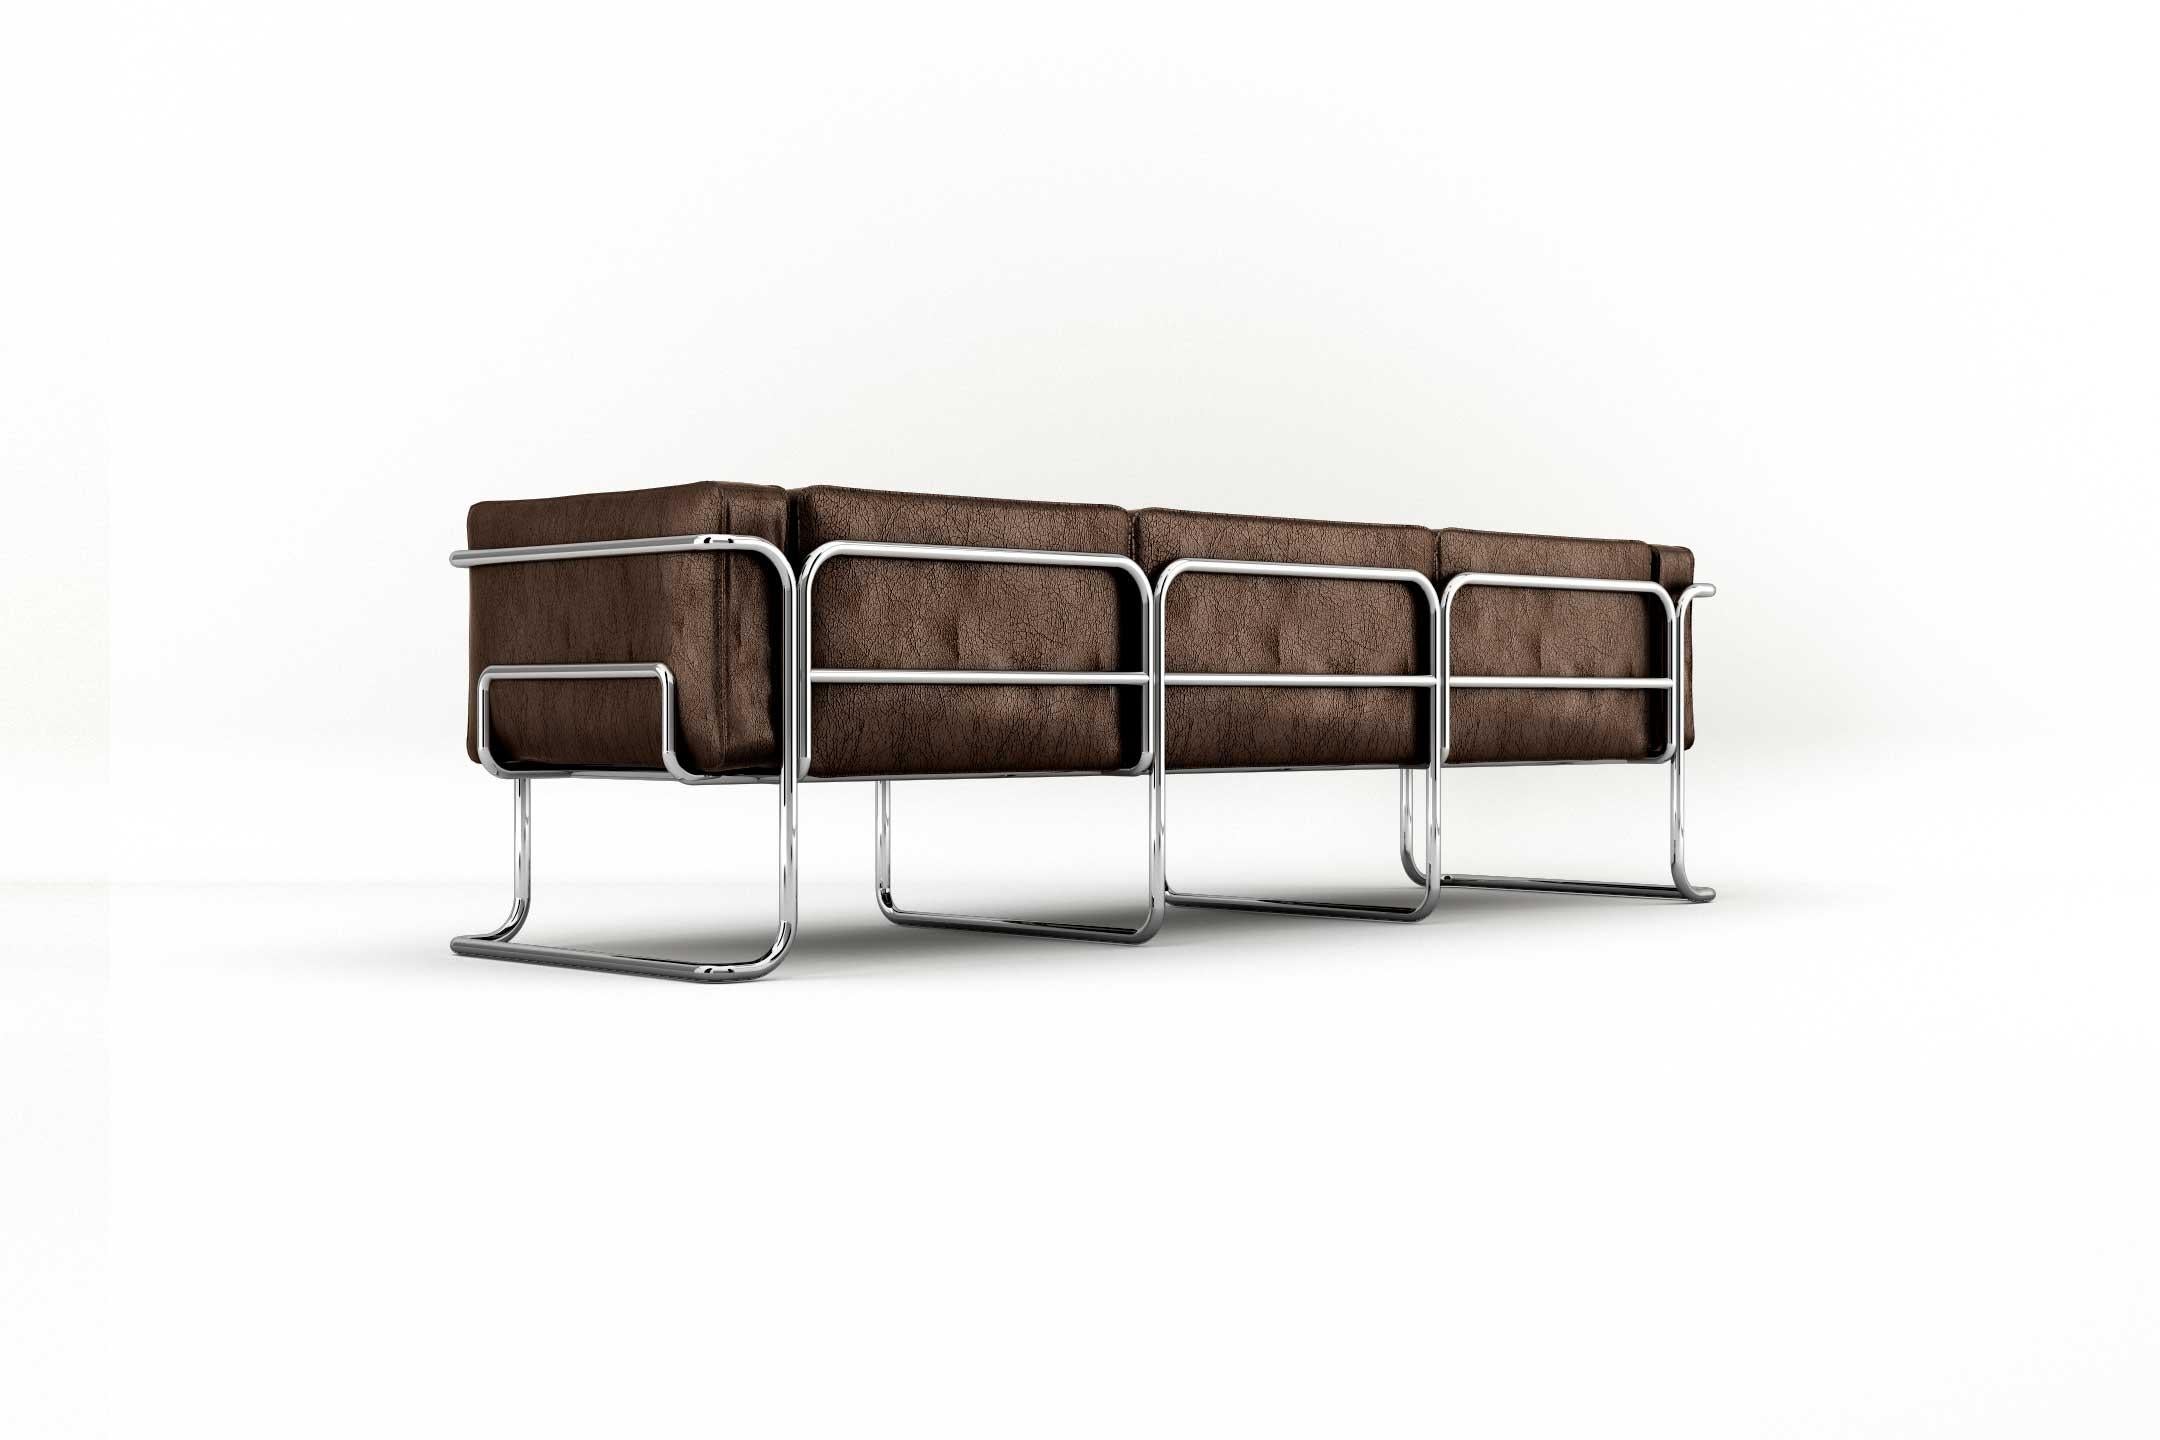 Polished Lotus 3 Seat Sofa - Modern Brown Leather Sofa with Stainless Steel Legs For Sale